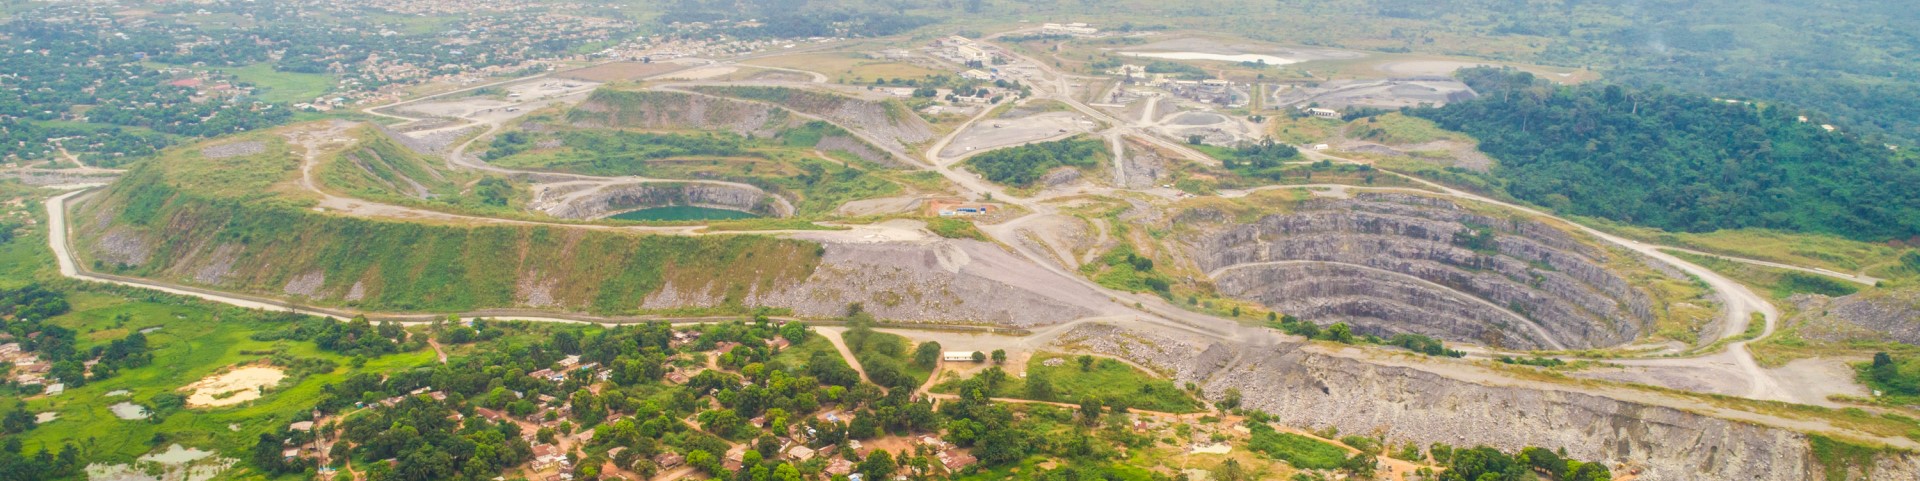 Aerial view of a mining area for extracting diamonds in Kono, Sierra Leone.